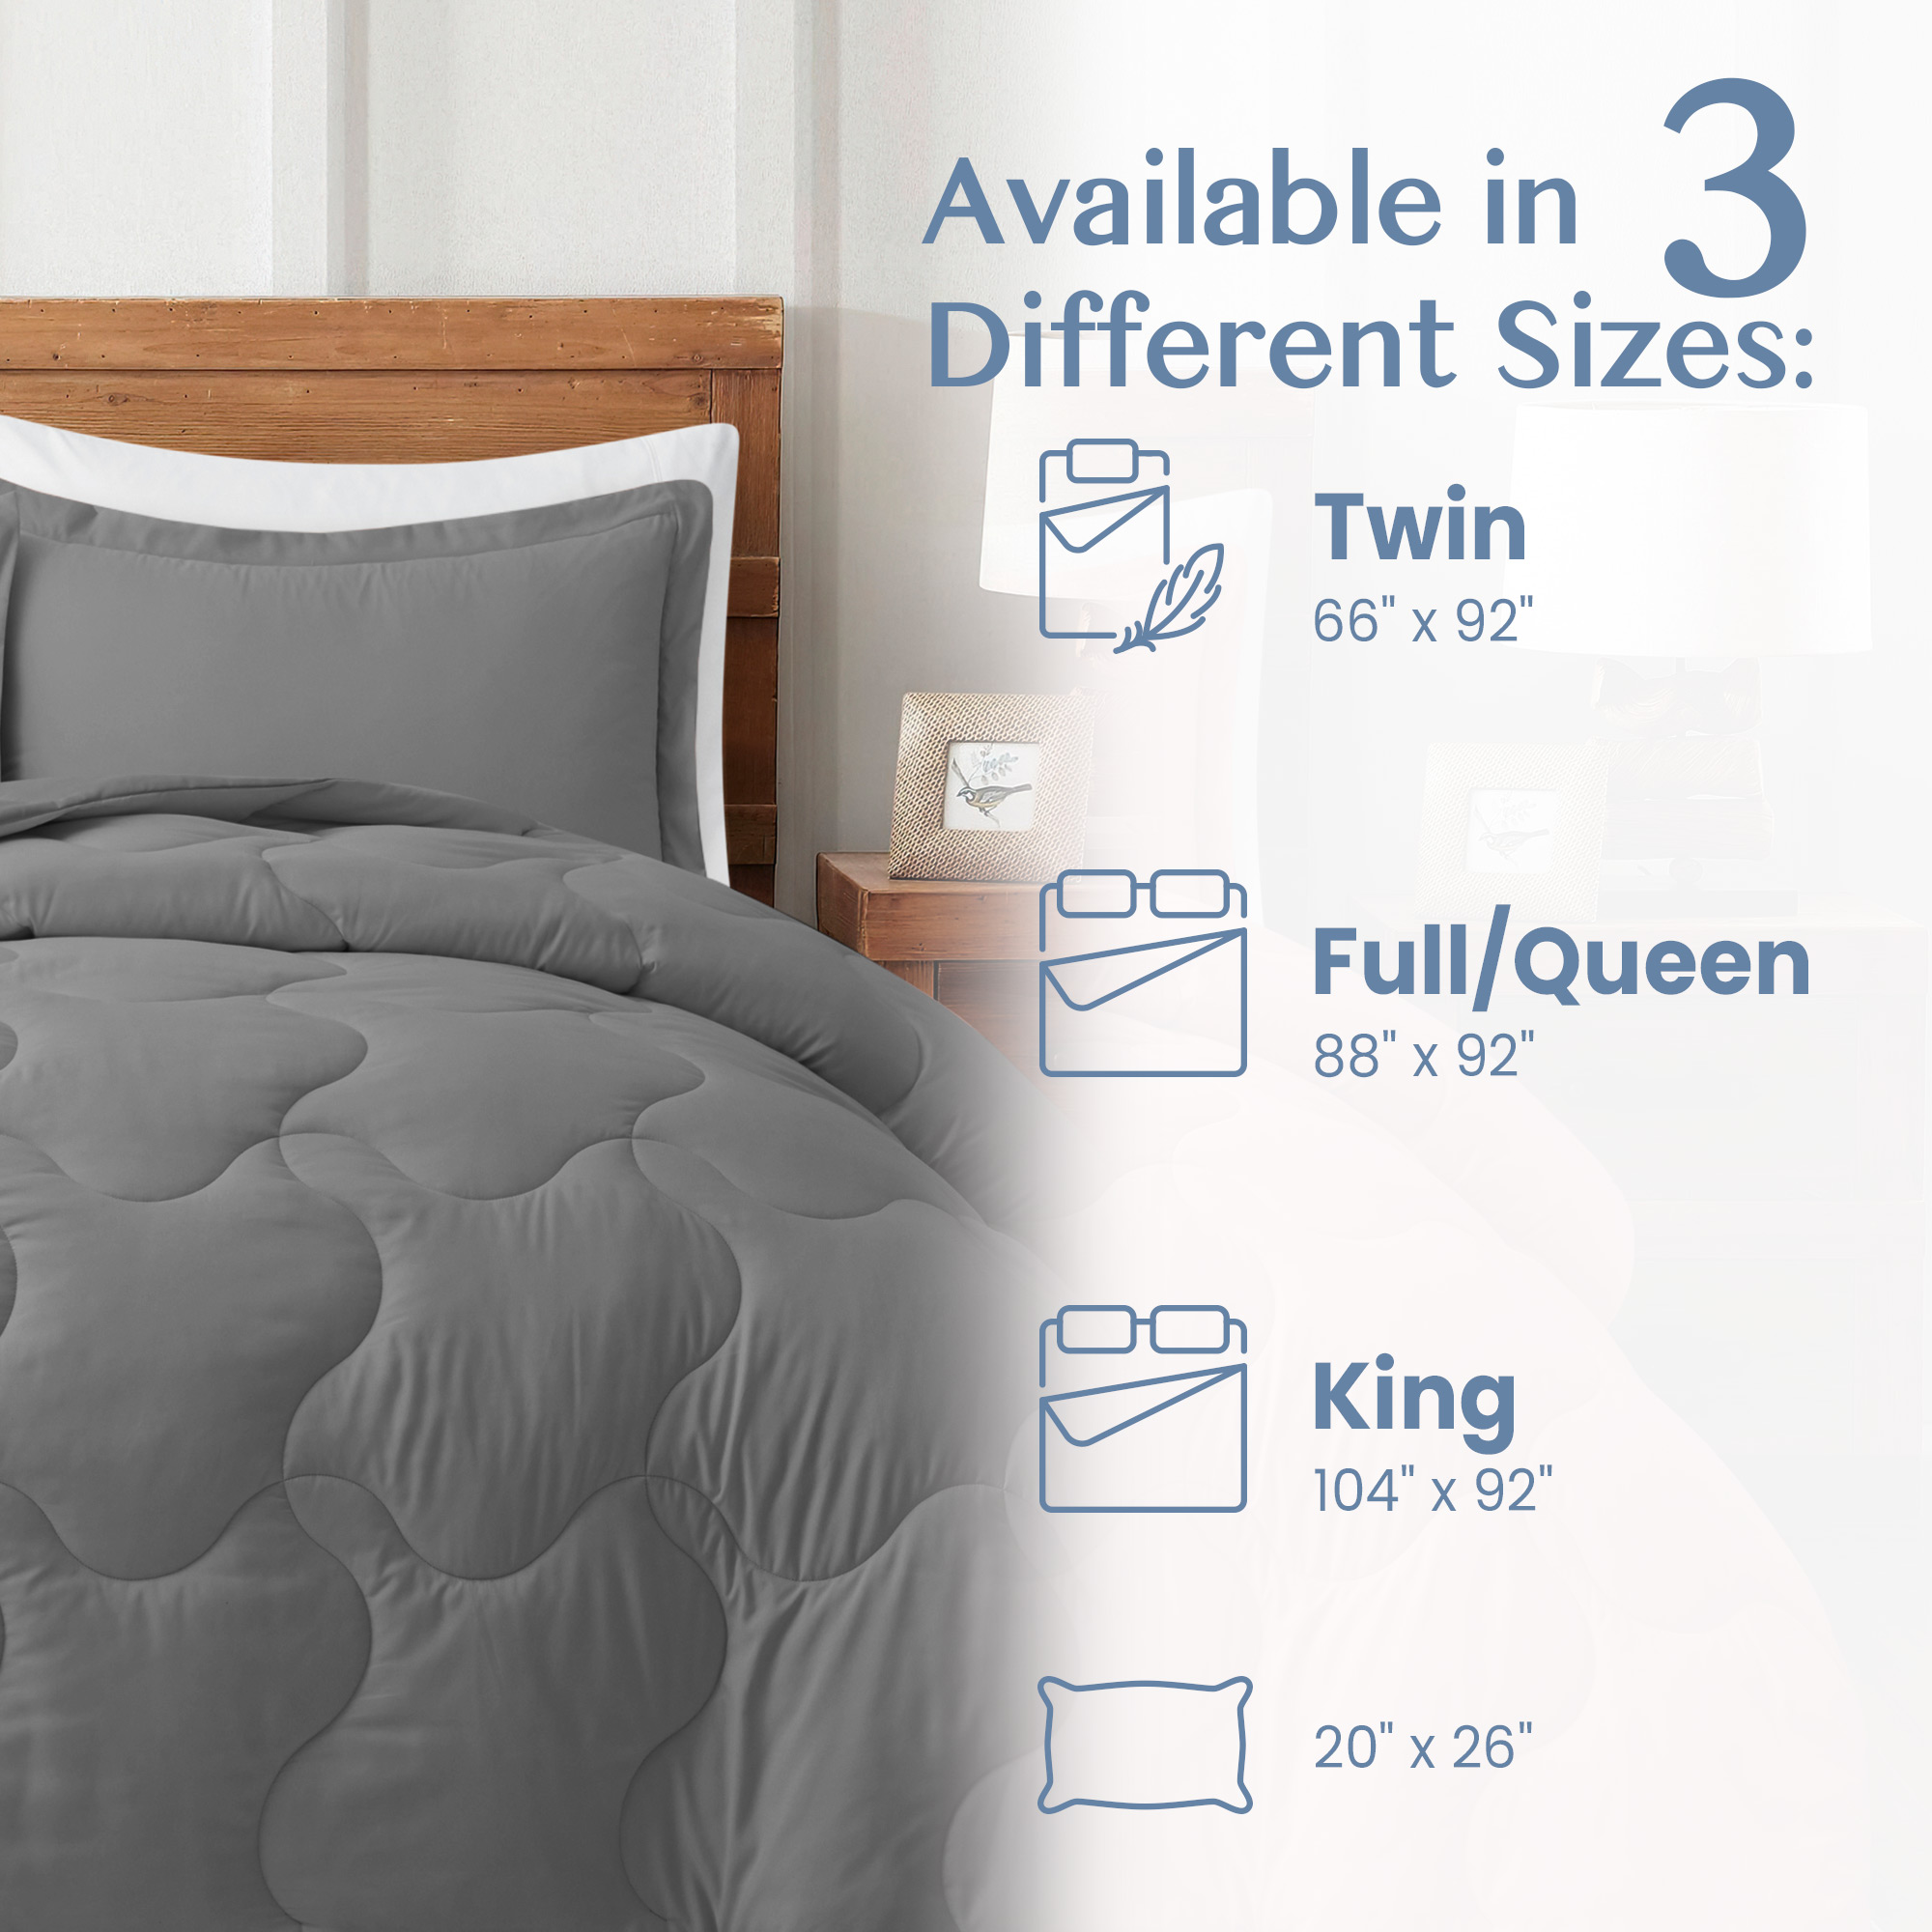 Peace Nest 3-Piece Lightweight Solid Reversible Quilted Down Alternative Comforter and Shams Bedding Set, Queen - image 3 of 6